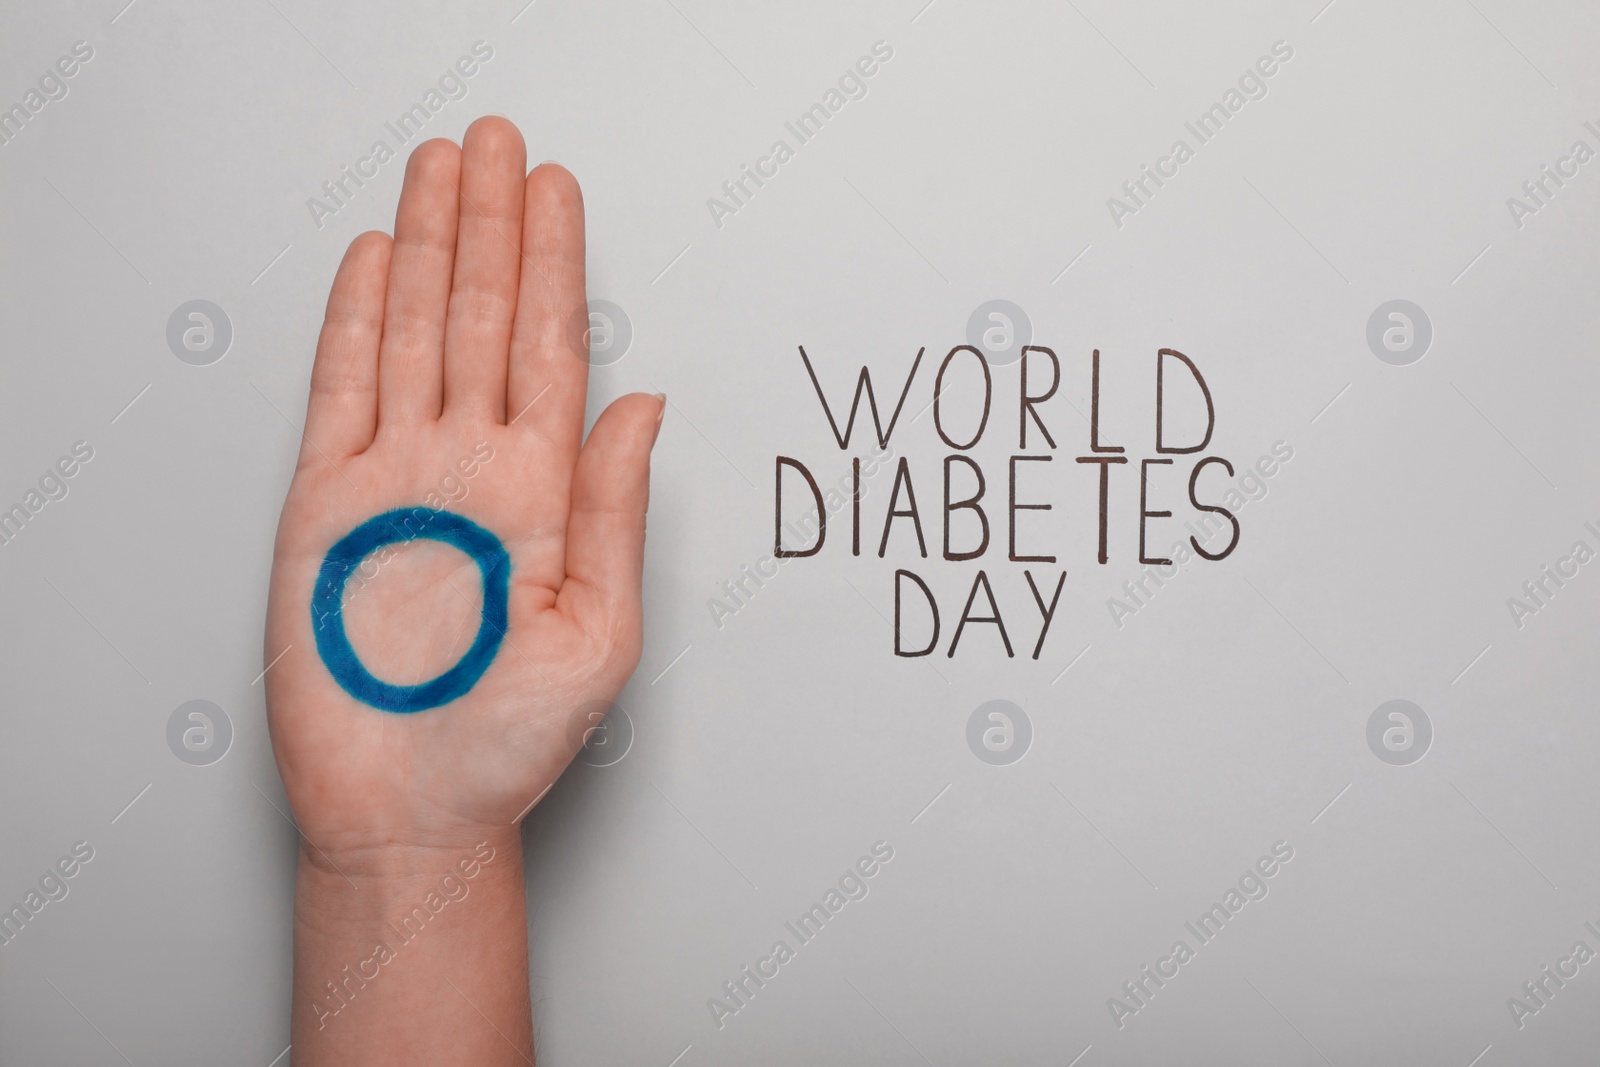 Photo of Woman showing palm with blue circle near text World Diabetes Day on light background, closeup